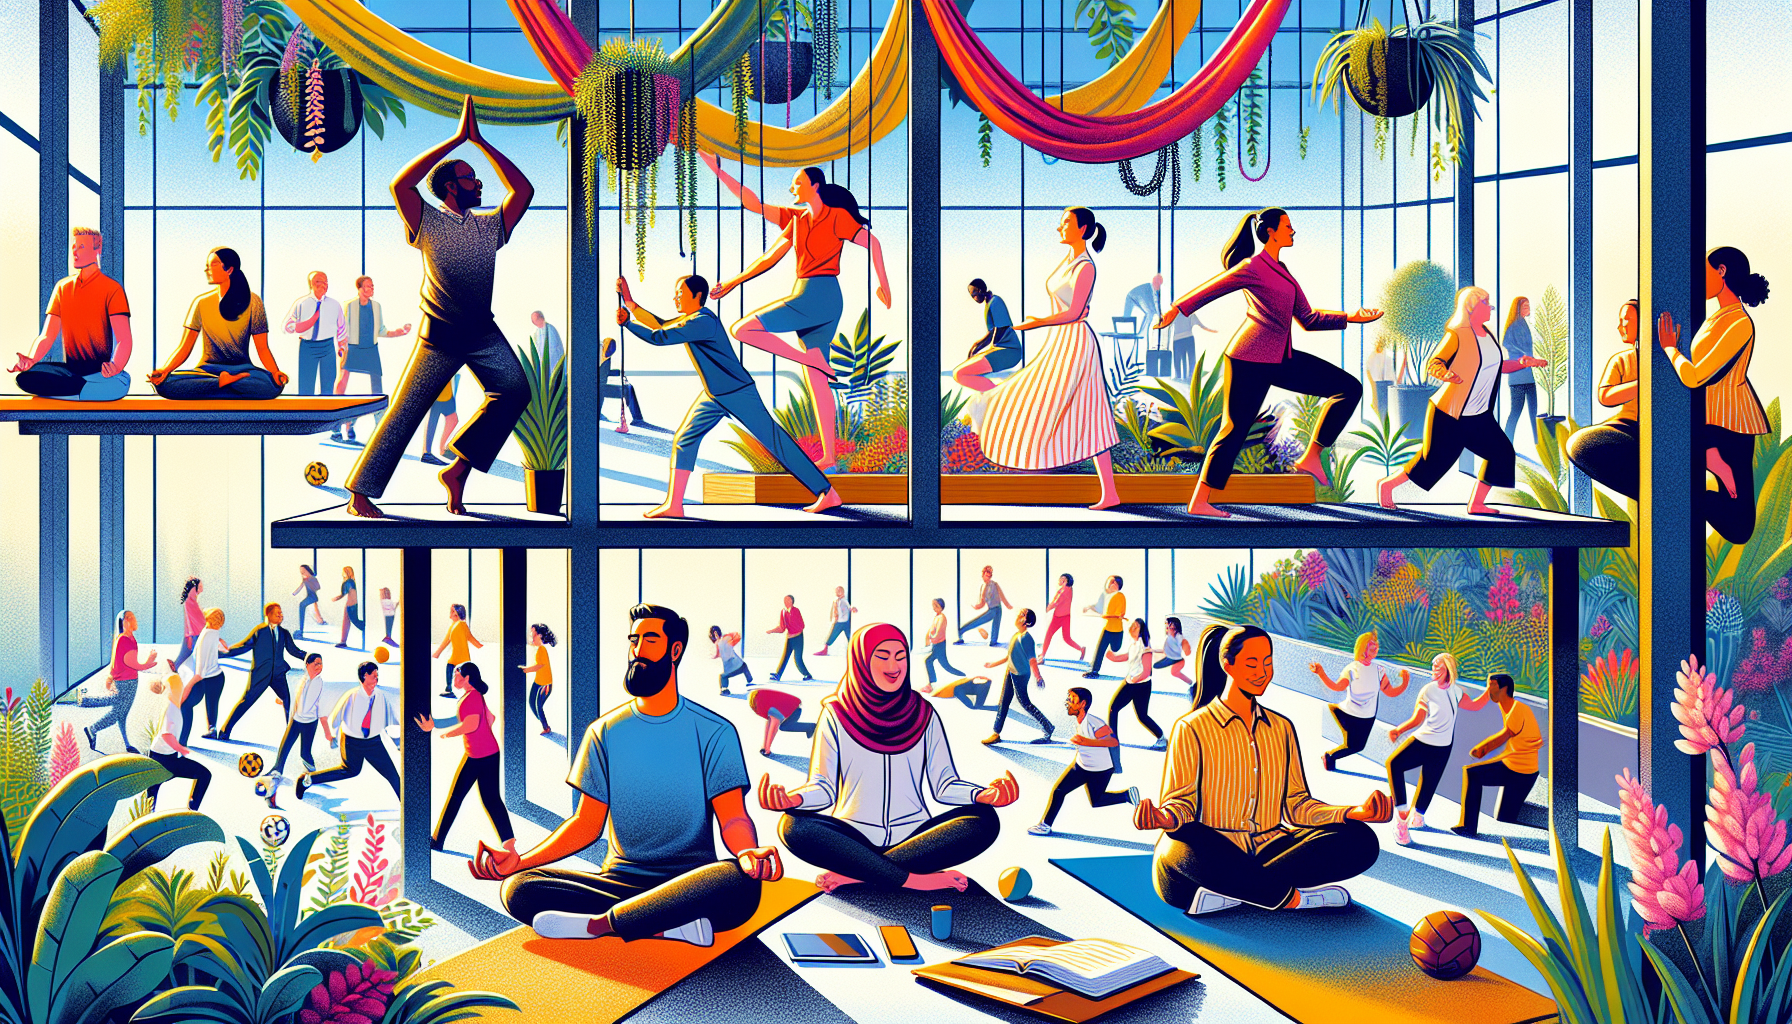 Illustration of diverse group of employees engaging in wellness activities